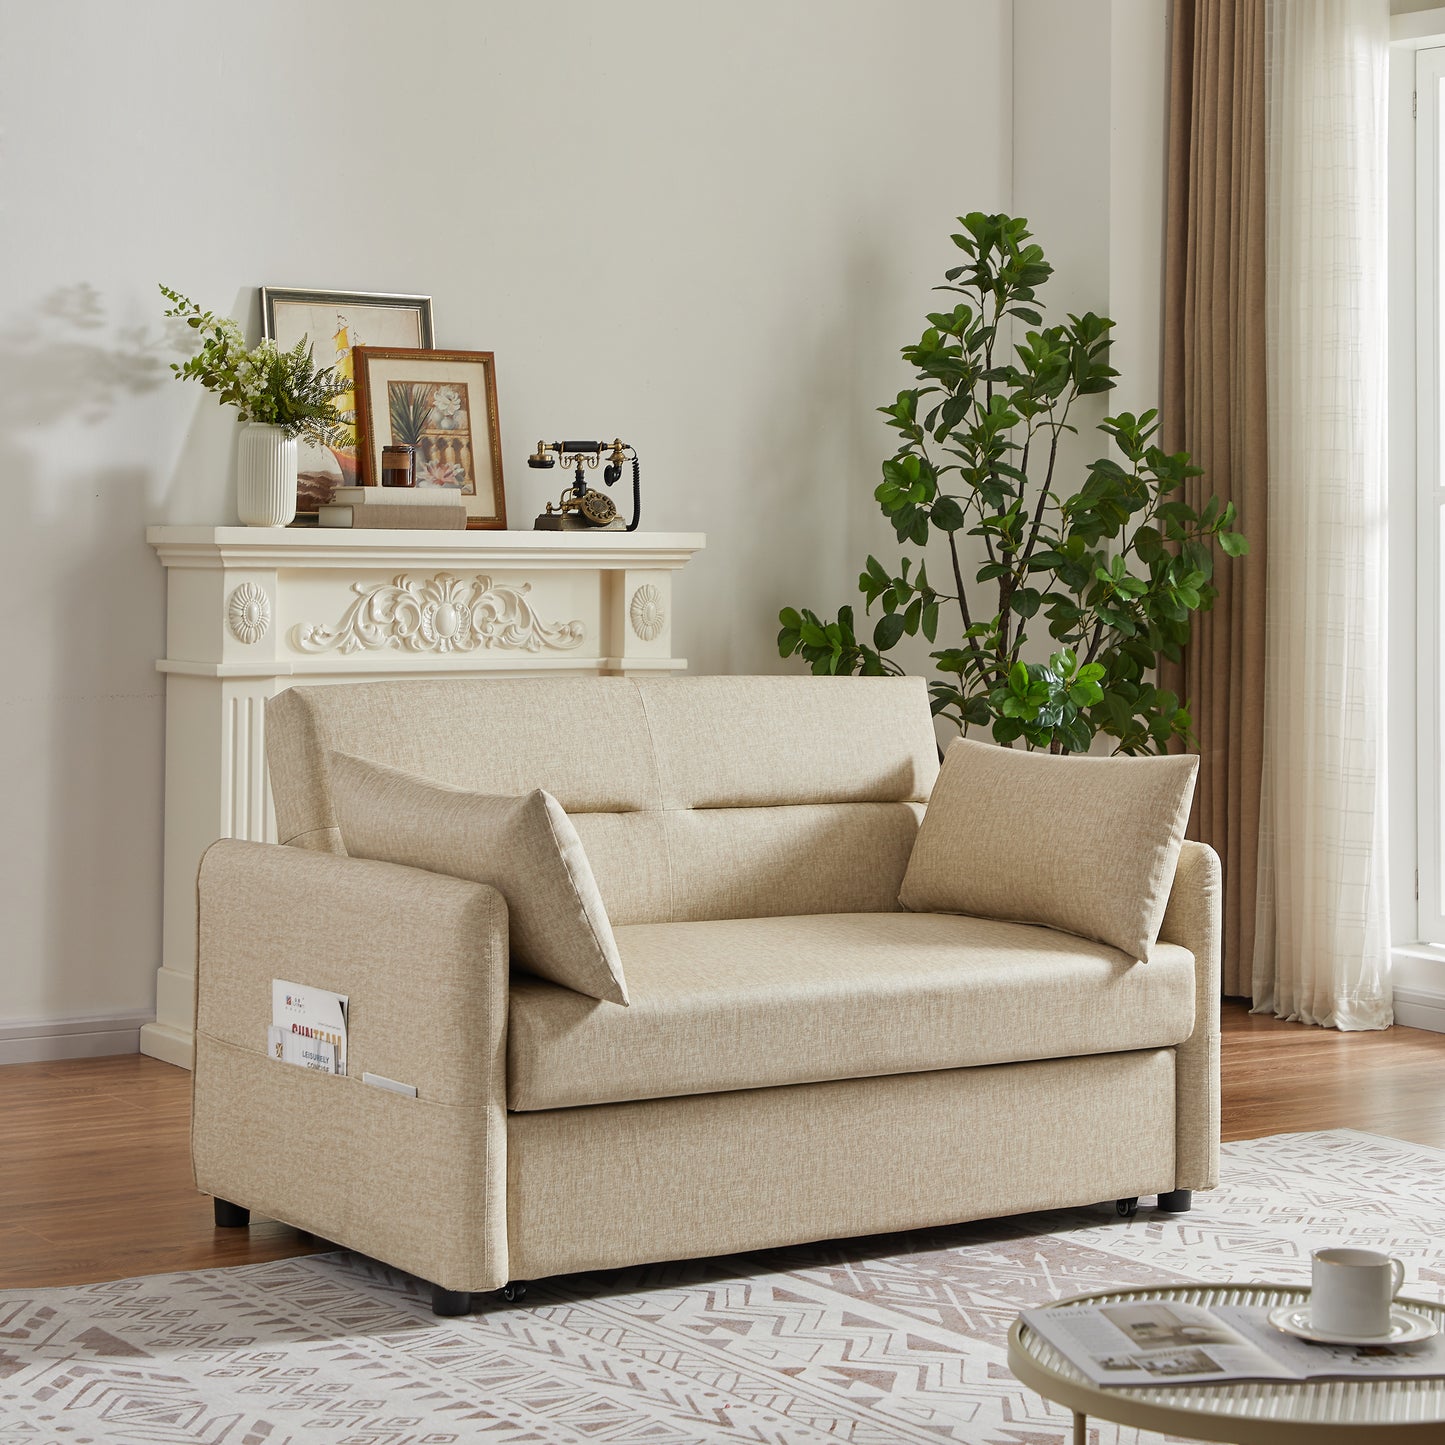 Leisure Loveseat Sofa   with 2 pillows